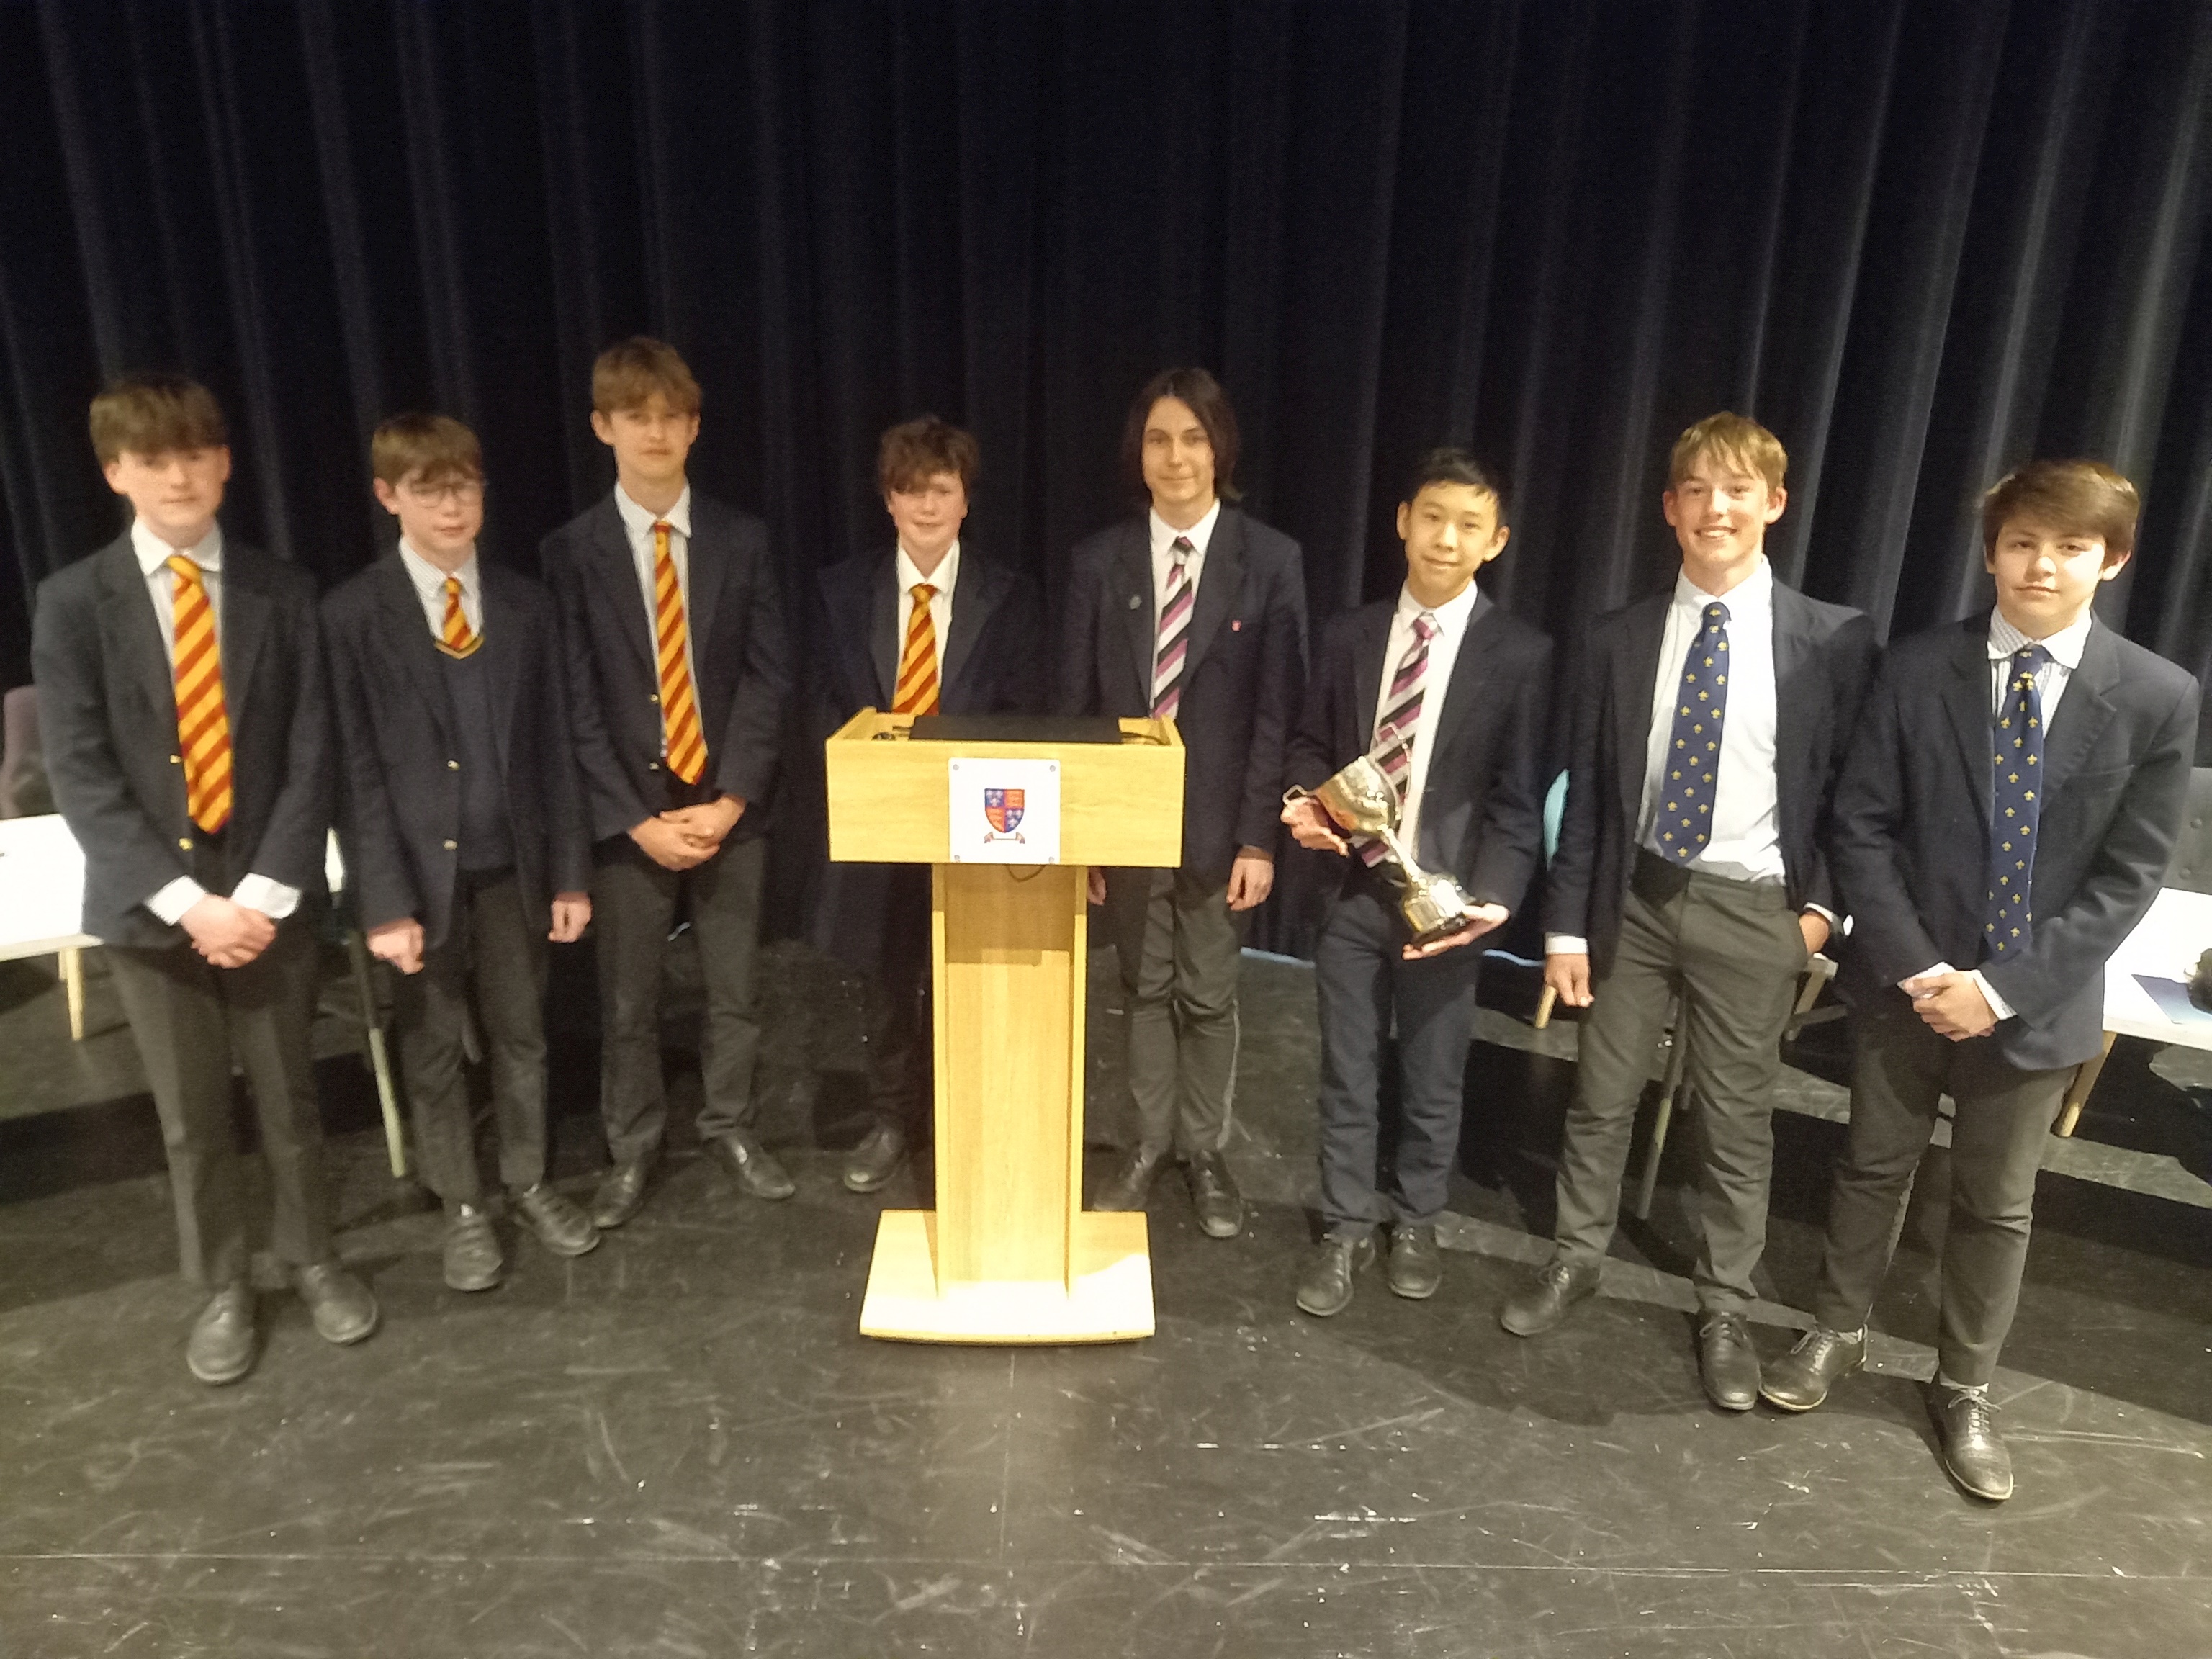 School House wins "fiercely contested" Junior House Debating Competition 